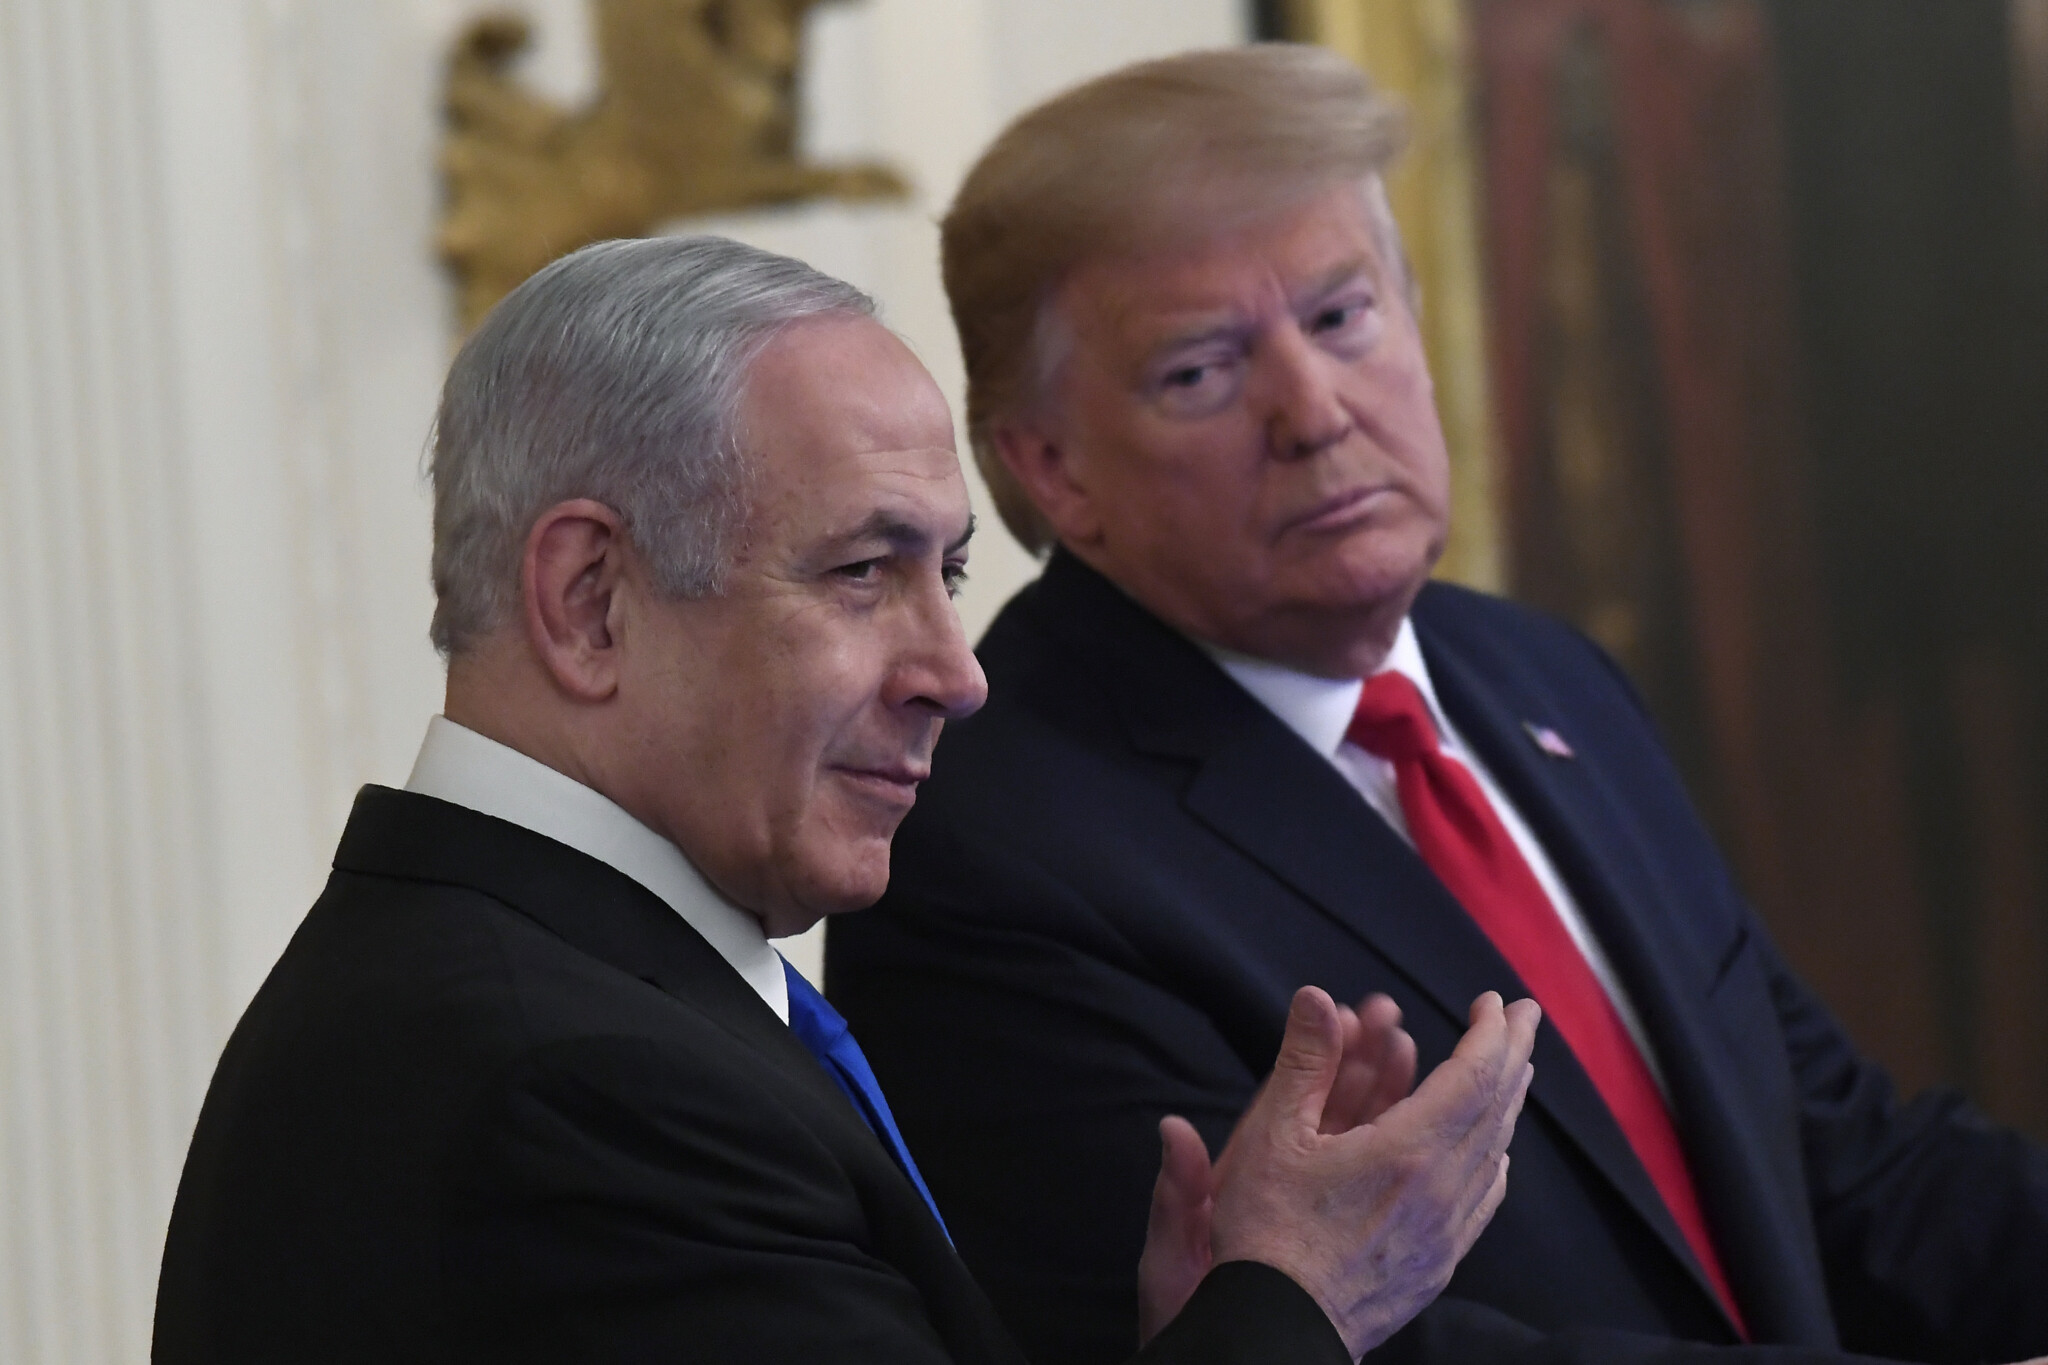 US President Donald Trump, right, looks over to Prime Minister Benjamin Netanyahu, left, during an event in the East Room of the White House in Washington, January 28, 2020. (AP/Susan Walsh)